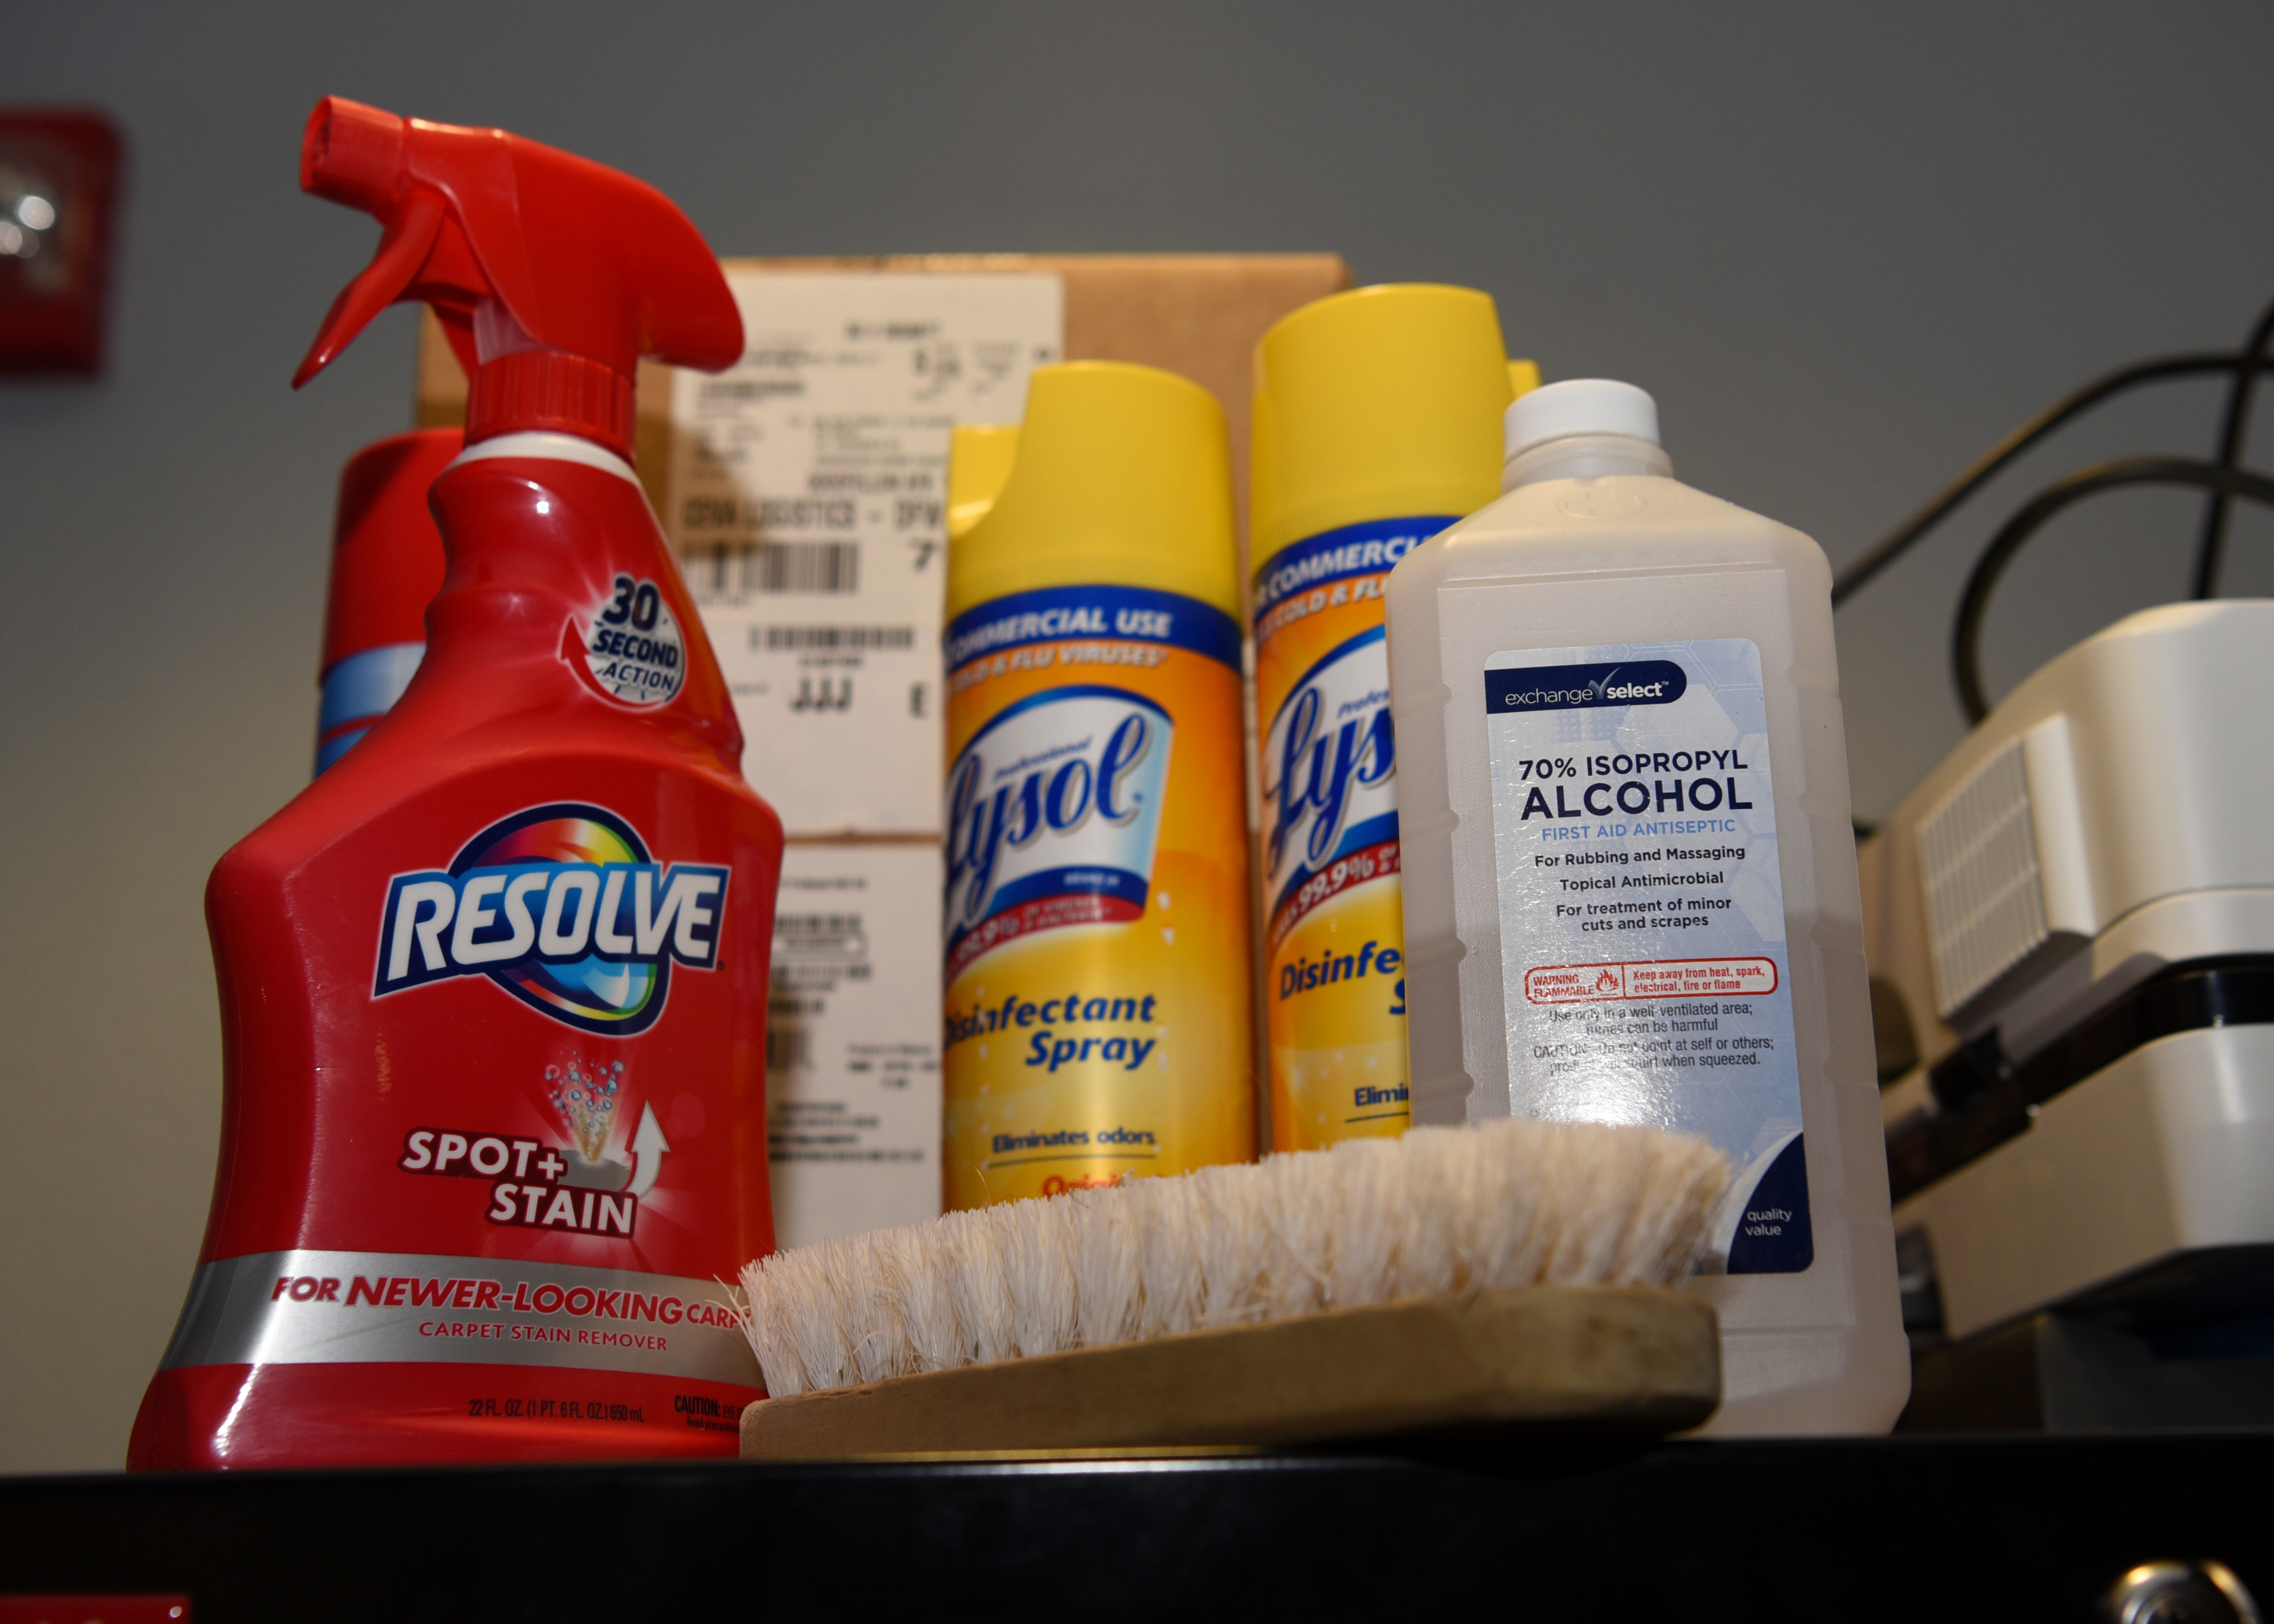 6 Cleaning Supplies for College COVID-19 2020